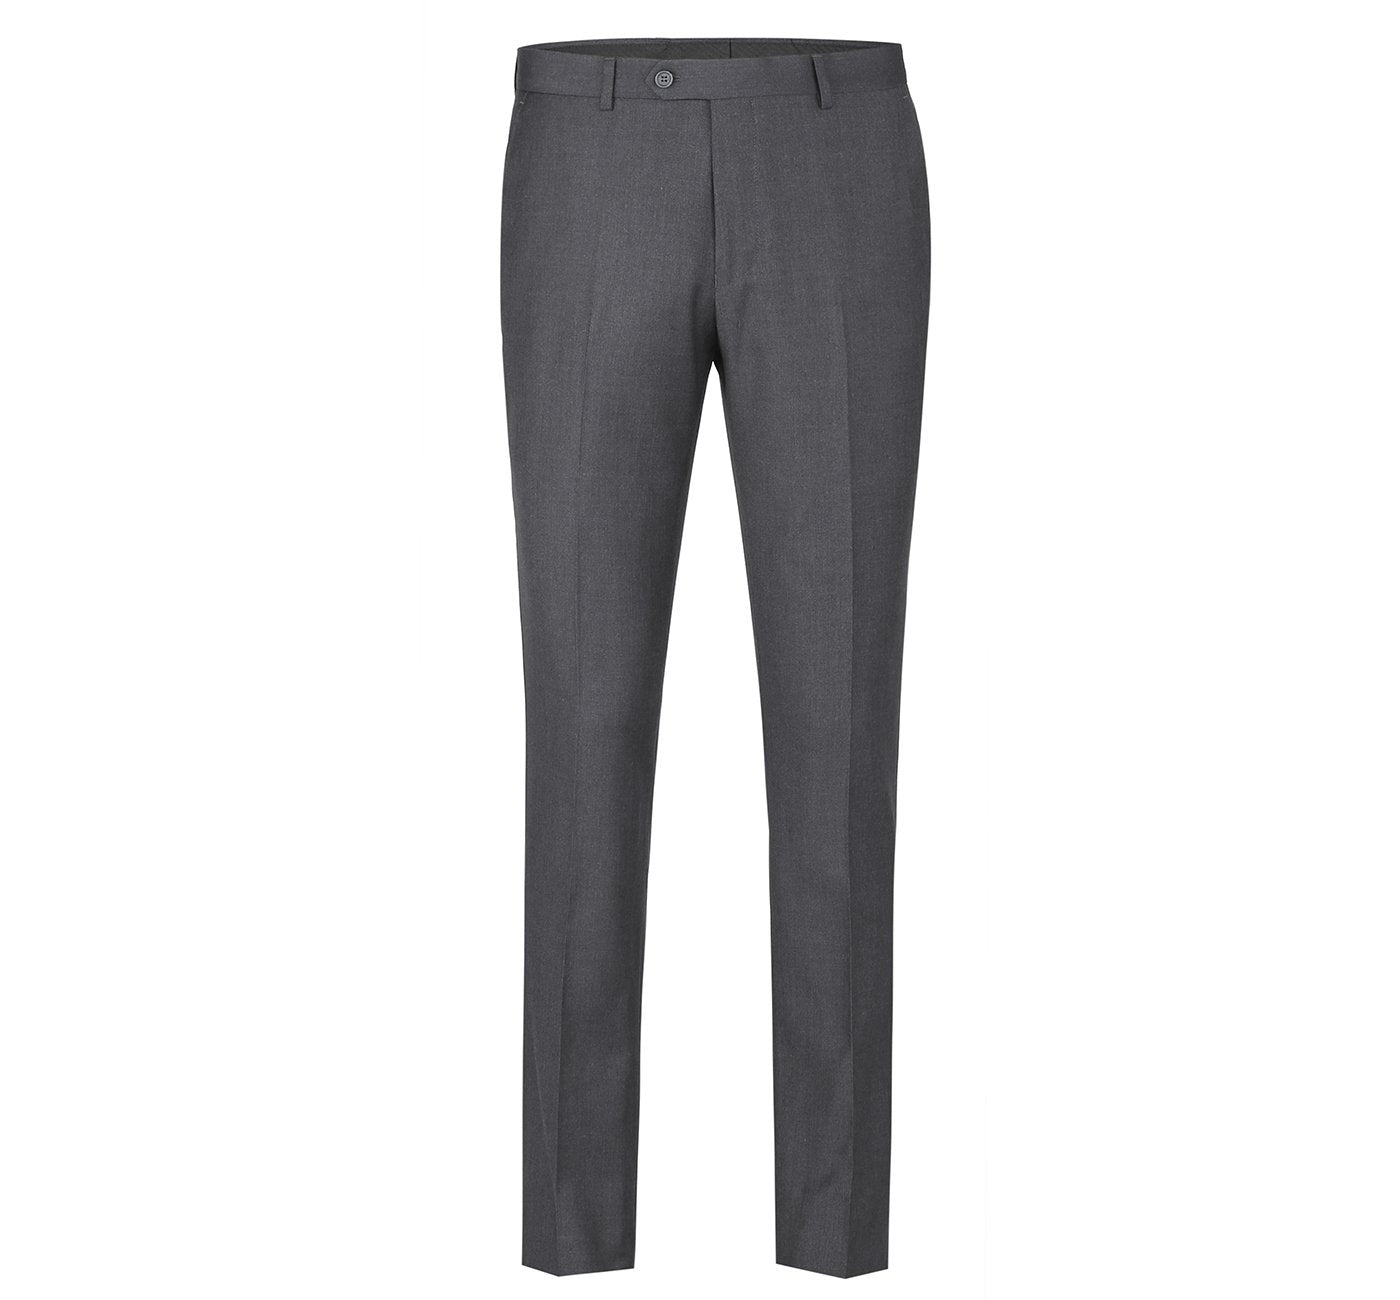 Kmart Mens Charcoal Grey Flat Front Business Pants, Size 42, NWT, Lot16